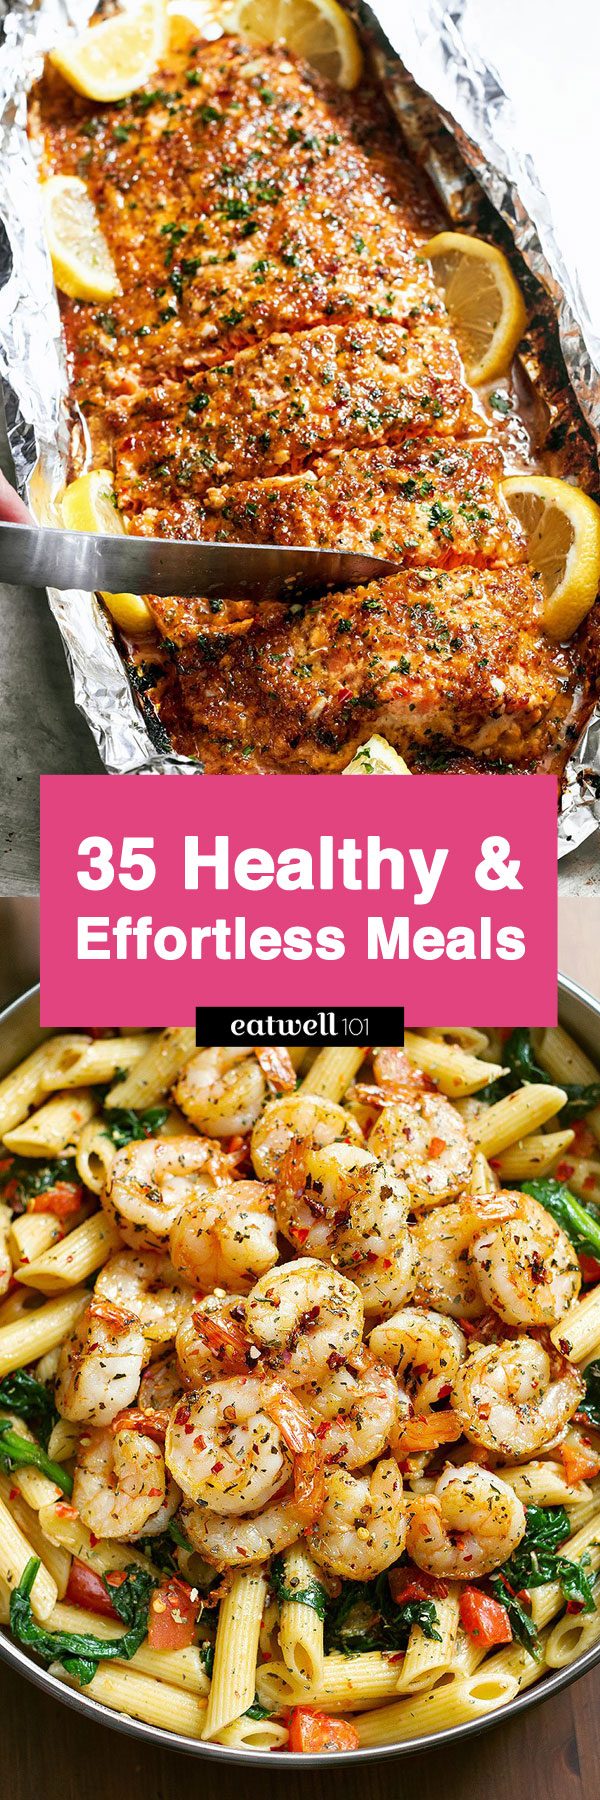 Easy Healthy Dinner Ideas 48 Low Effort And Healthy Dinner Recipes Eatwell101